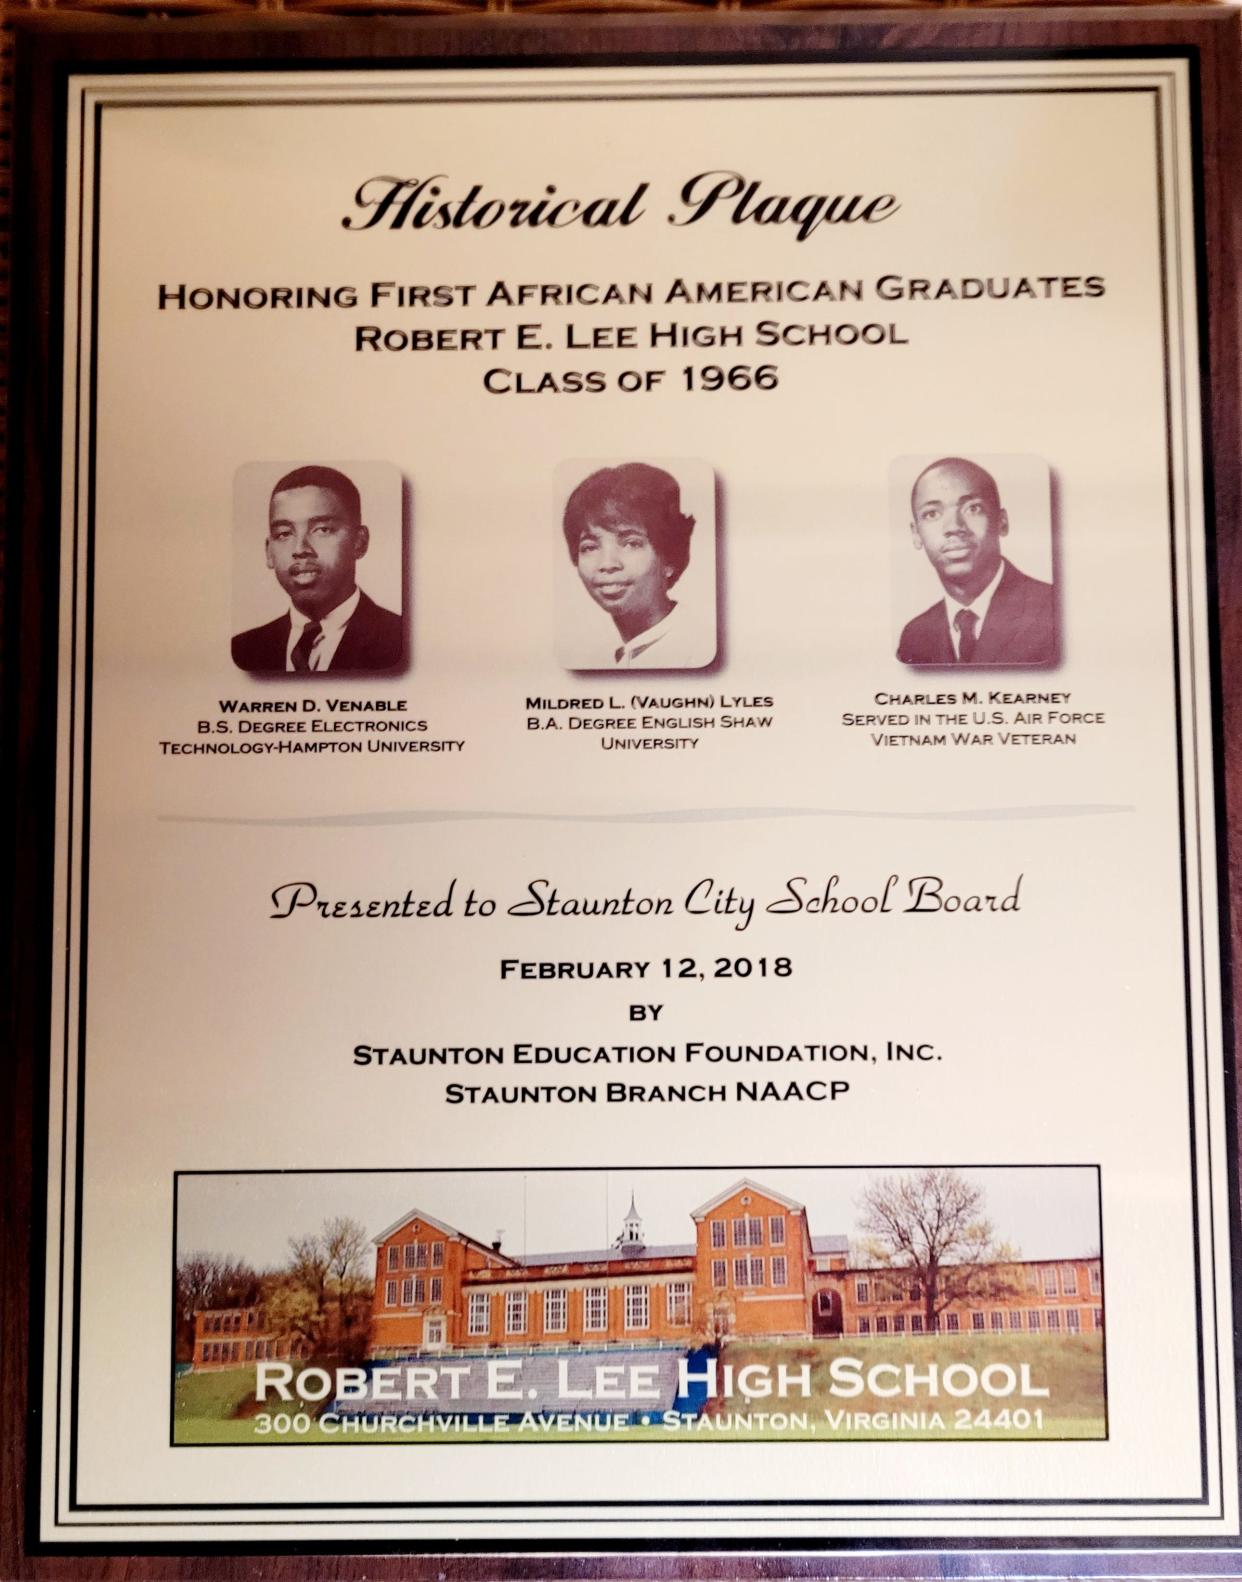 First African American graduates Charles M. Kearney (now deceased), Mildred L. Vaughn and Warren D. Venable from Staunton High School (formerly Robert E. Lee High School) from class of 1966.